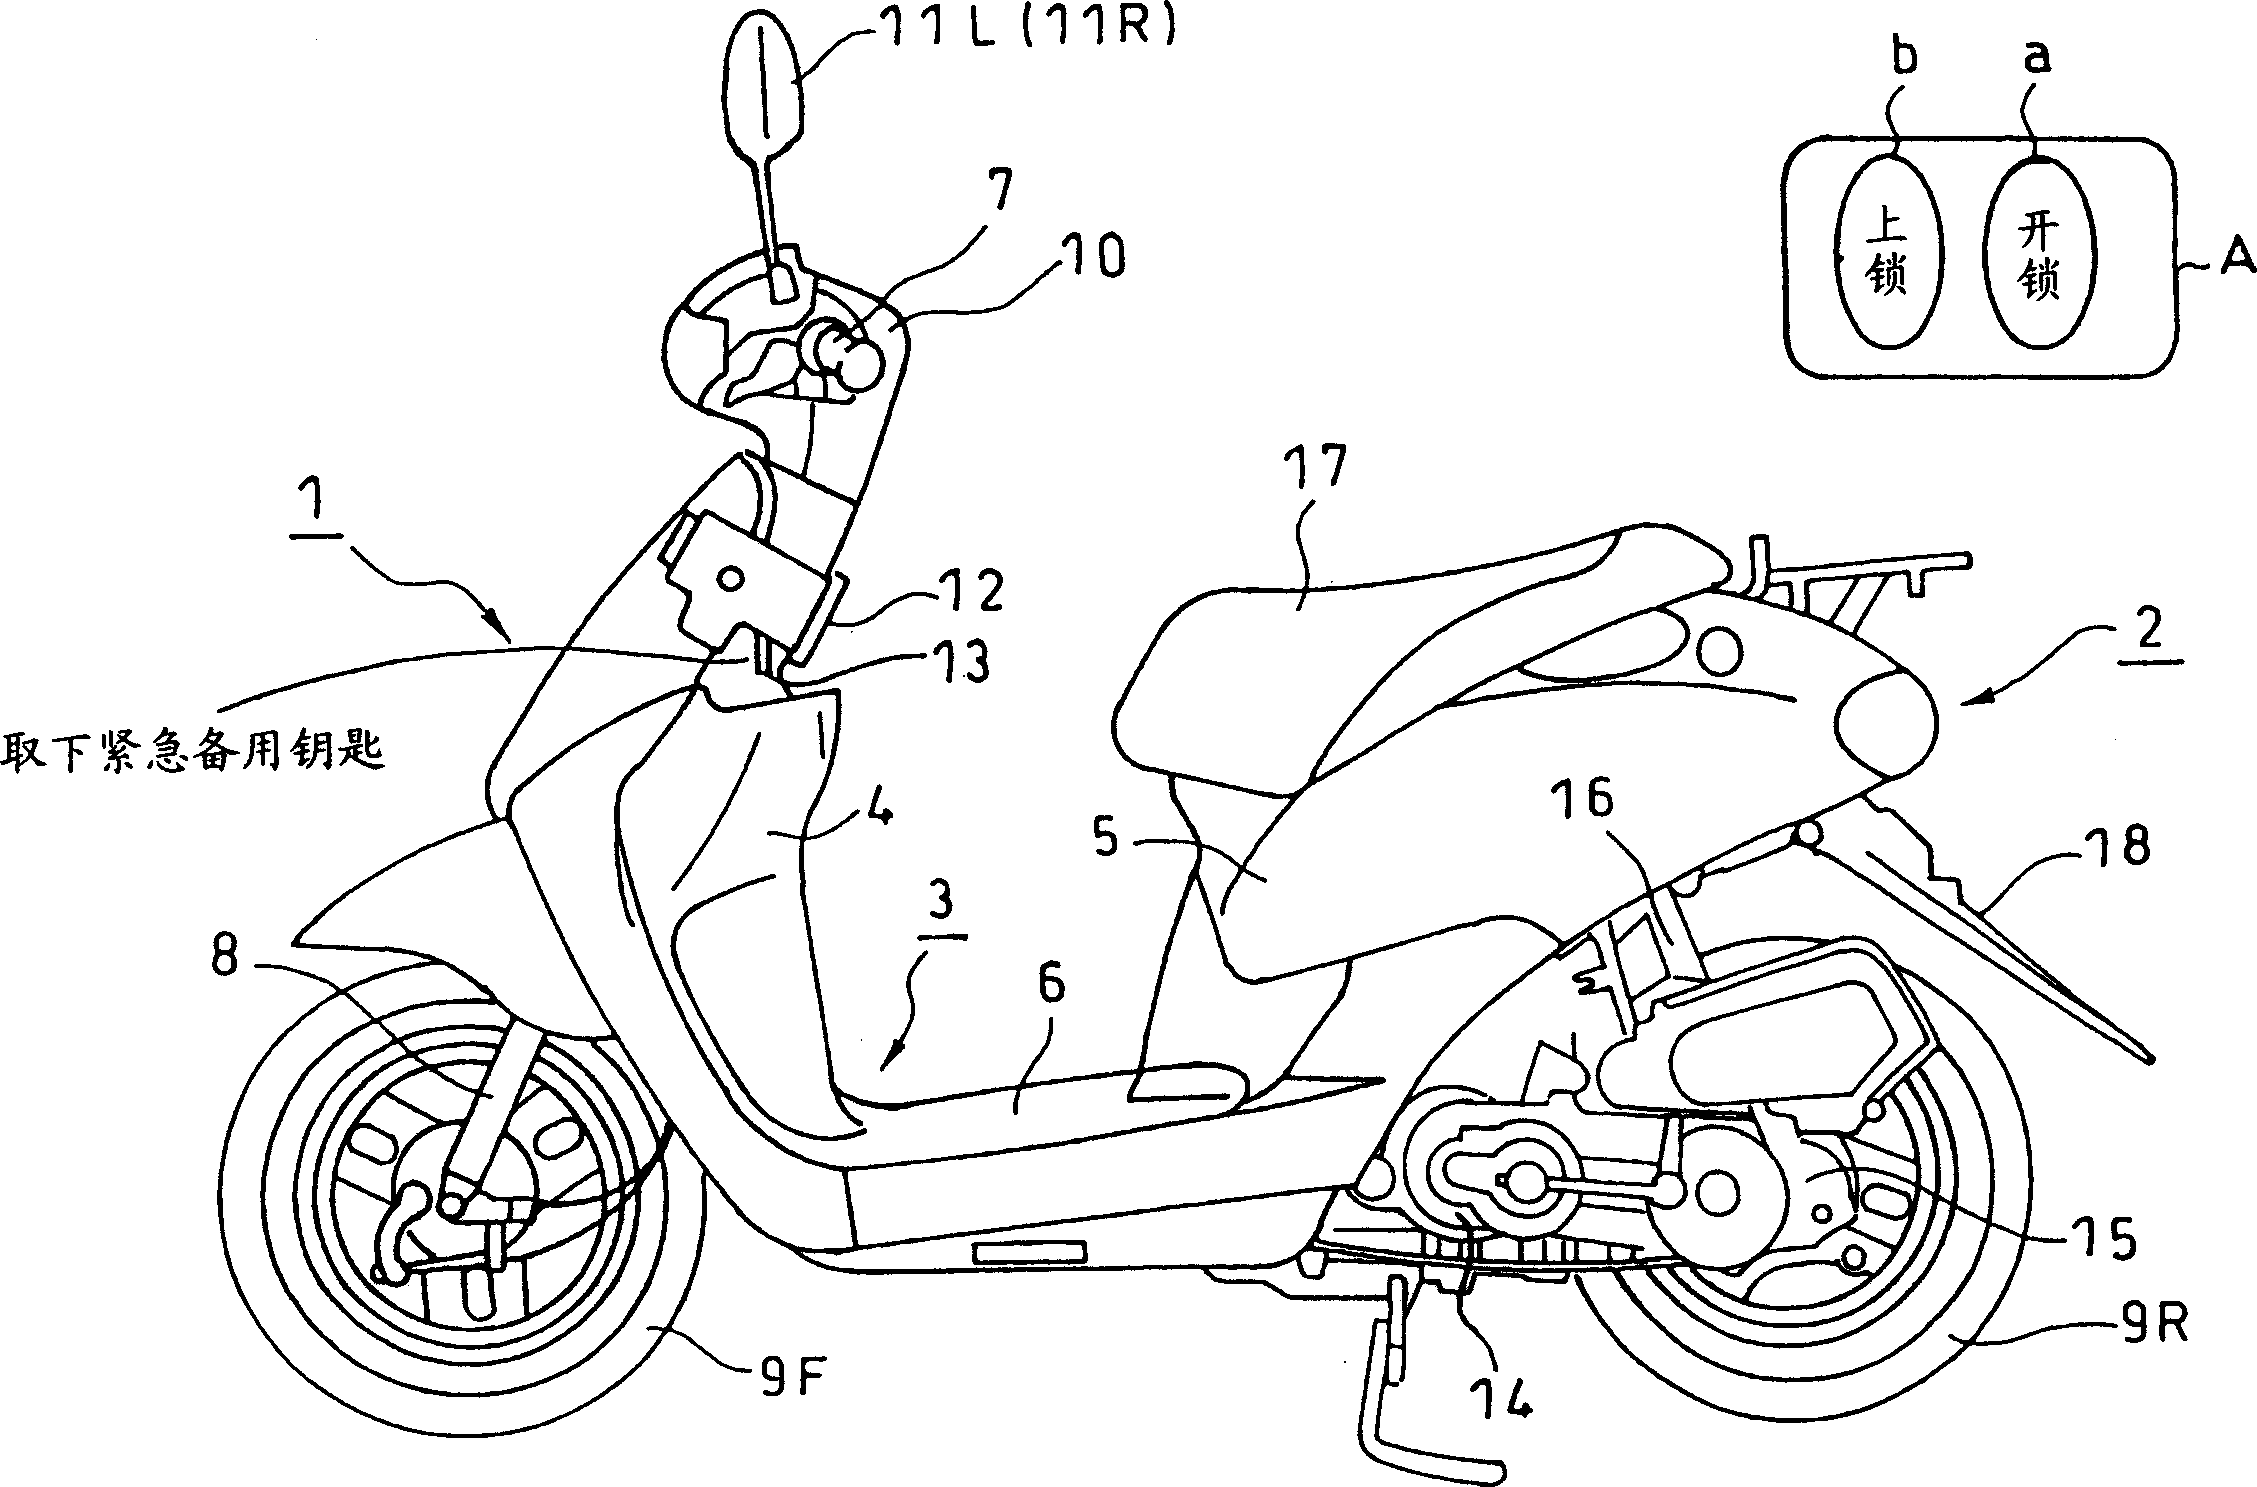 Anti-theft device for matorcycle